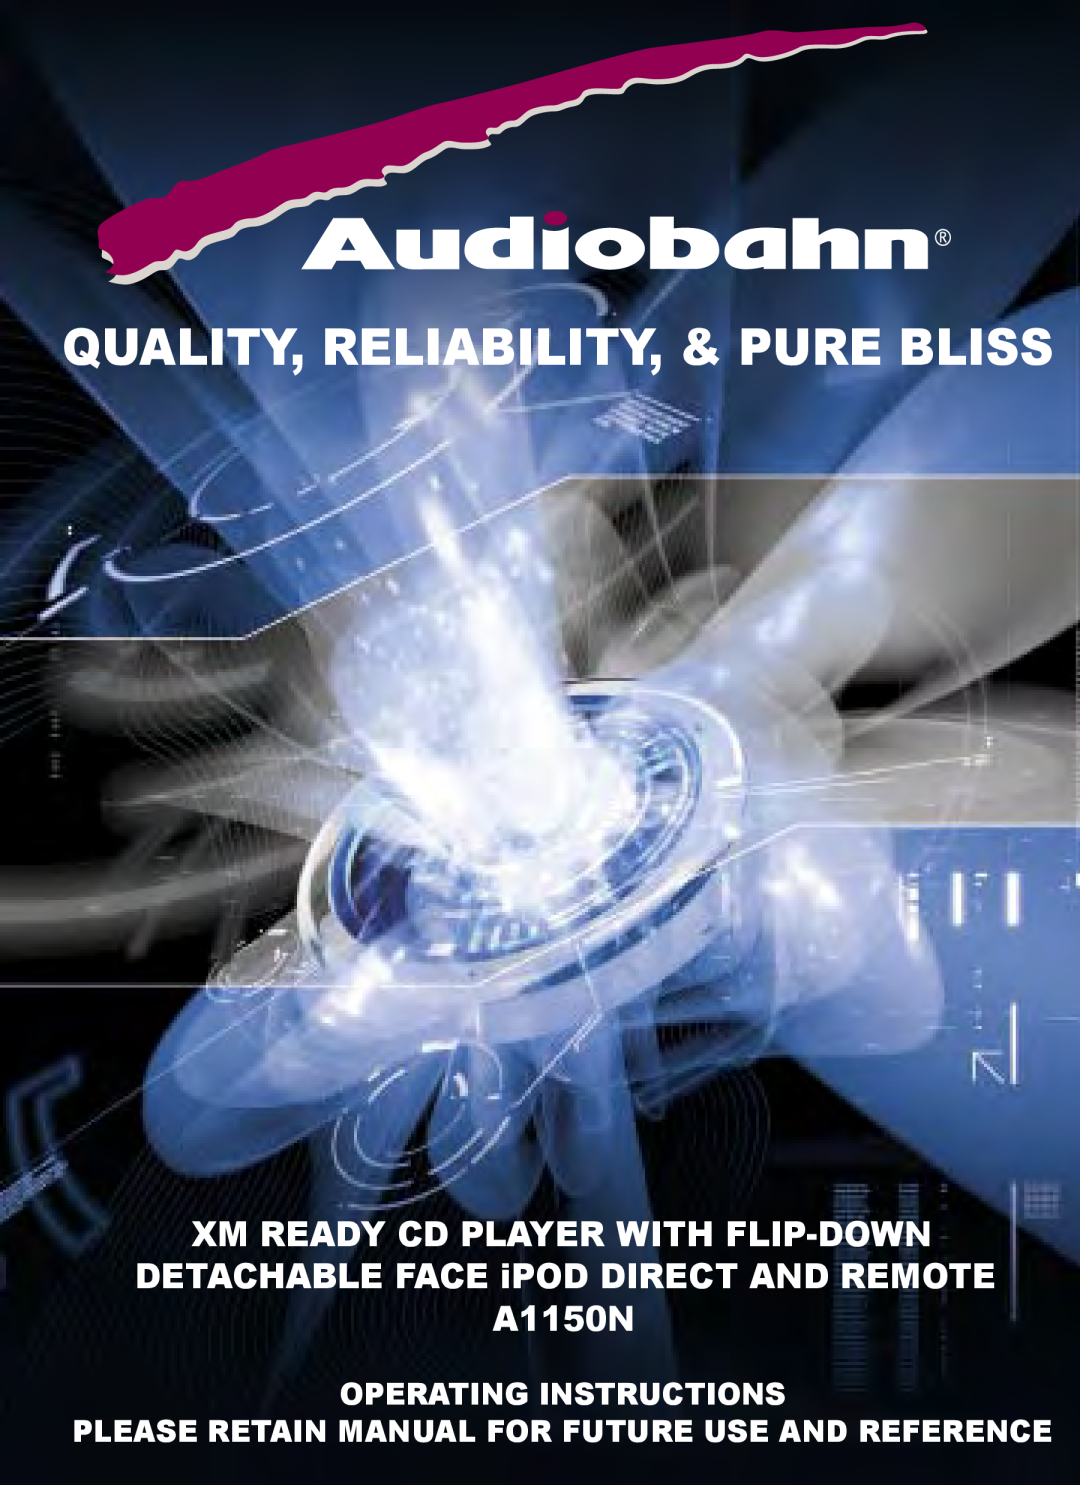 AudioBahn A1150N manual Quality, Reliability, & Pure Bliss, Operating Instructions 